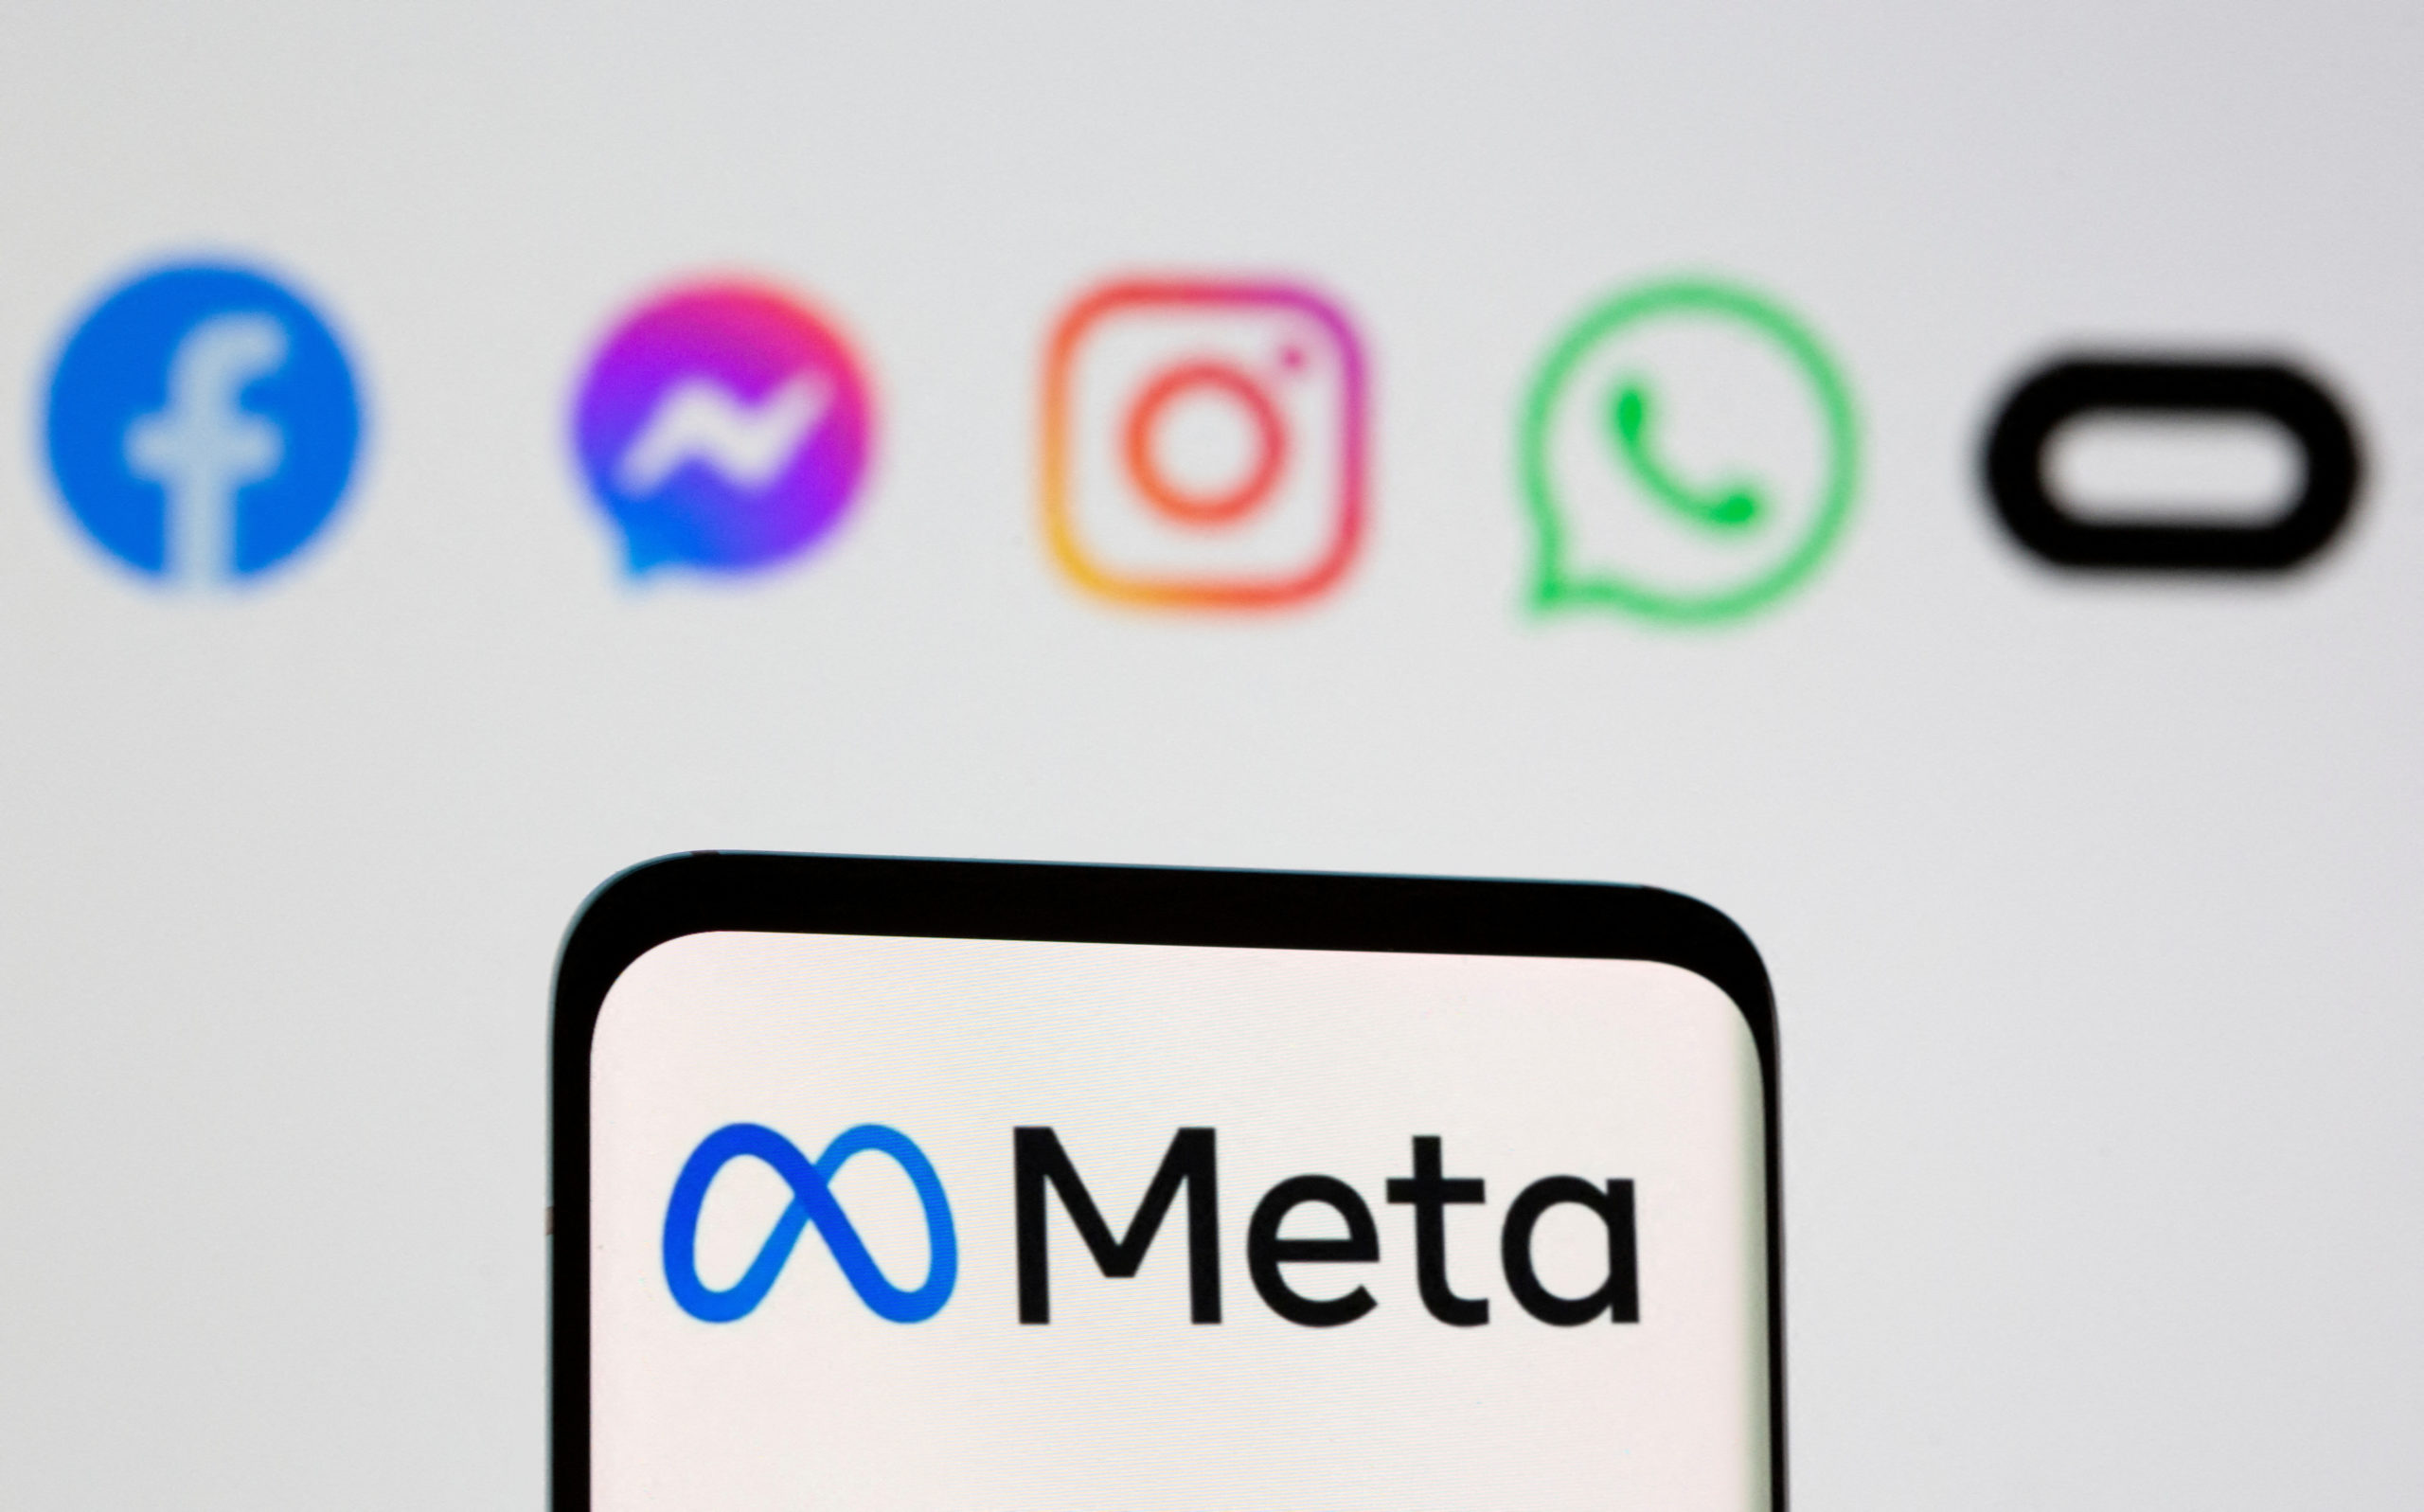 FILE PHOTO: Facebook's new rebrand logo Meta is seen on smartpone in front of displayed logo of Facebook, Messenger, Intagram, Whatsapp, Oculus in this illustration picture taken October 28, 2021. REUTERS/Dado Ruvic/Illustration